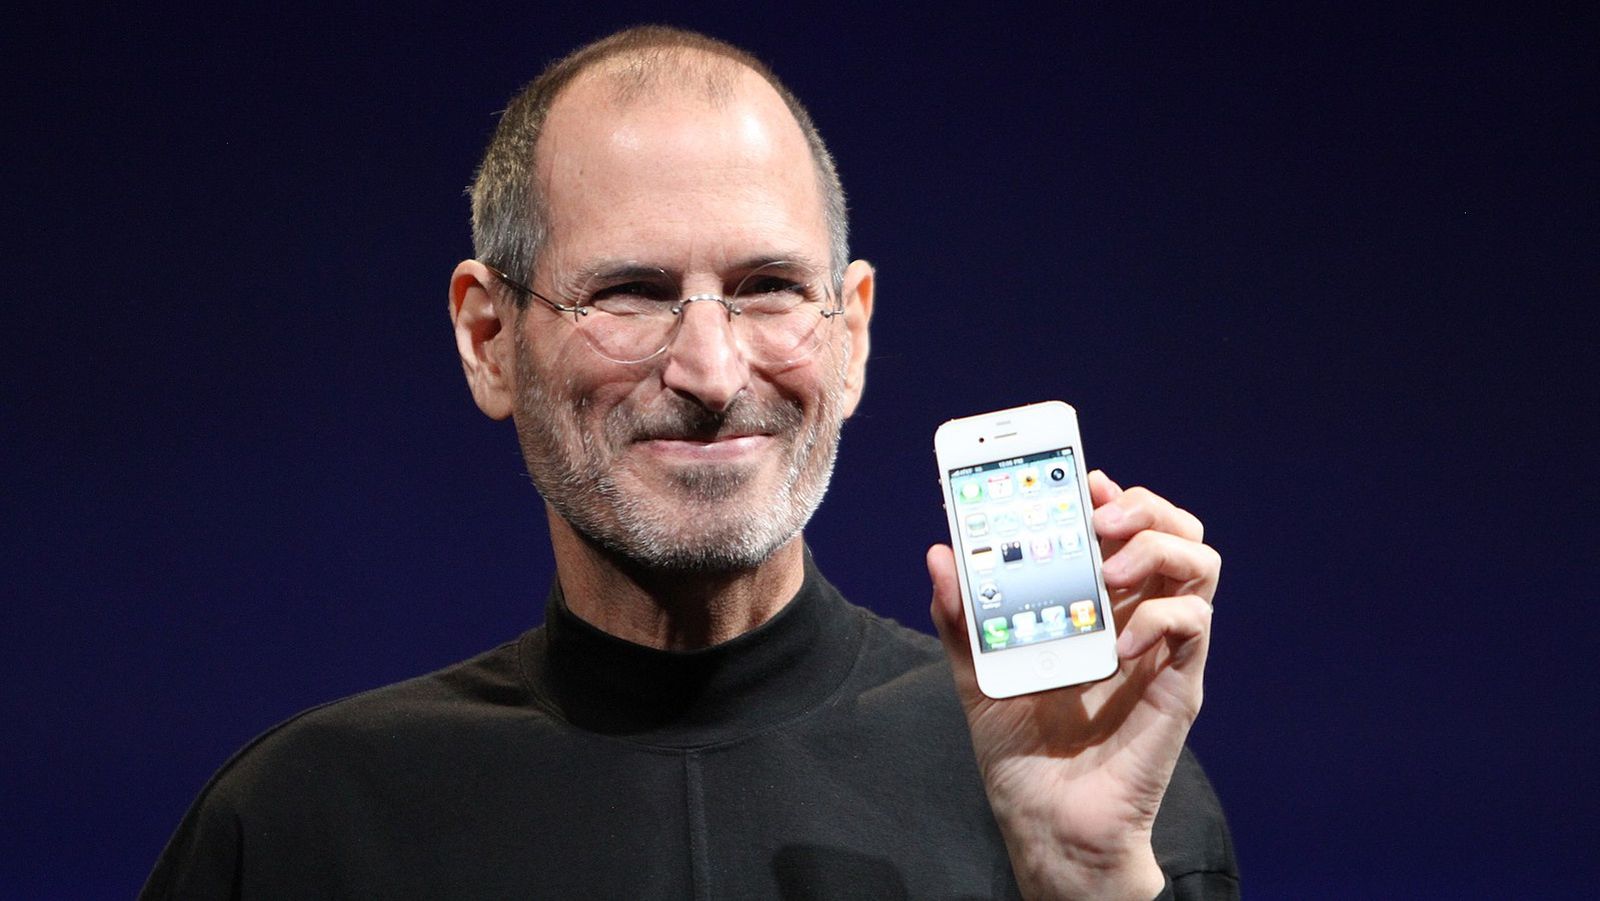 Steve Jobs Once Tossed the Original iPhone Across a Room to Impress Journalists